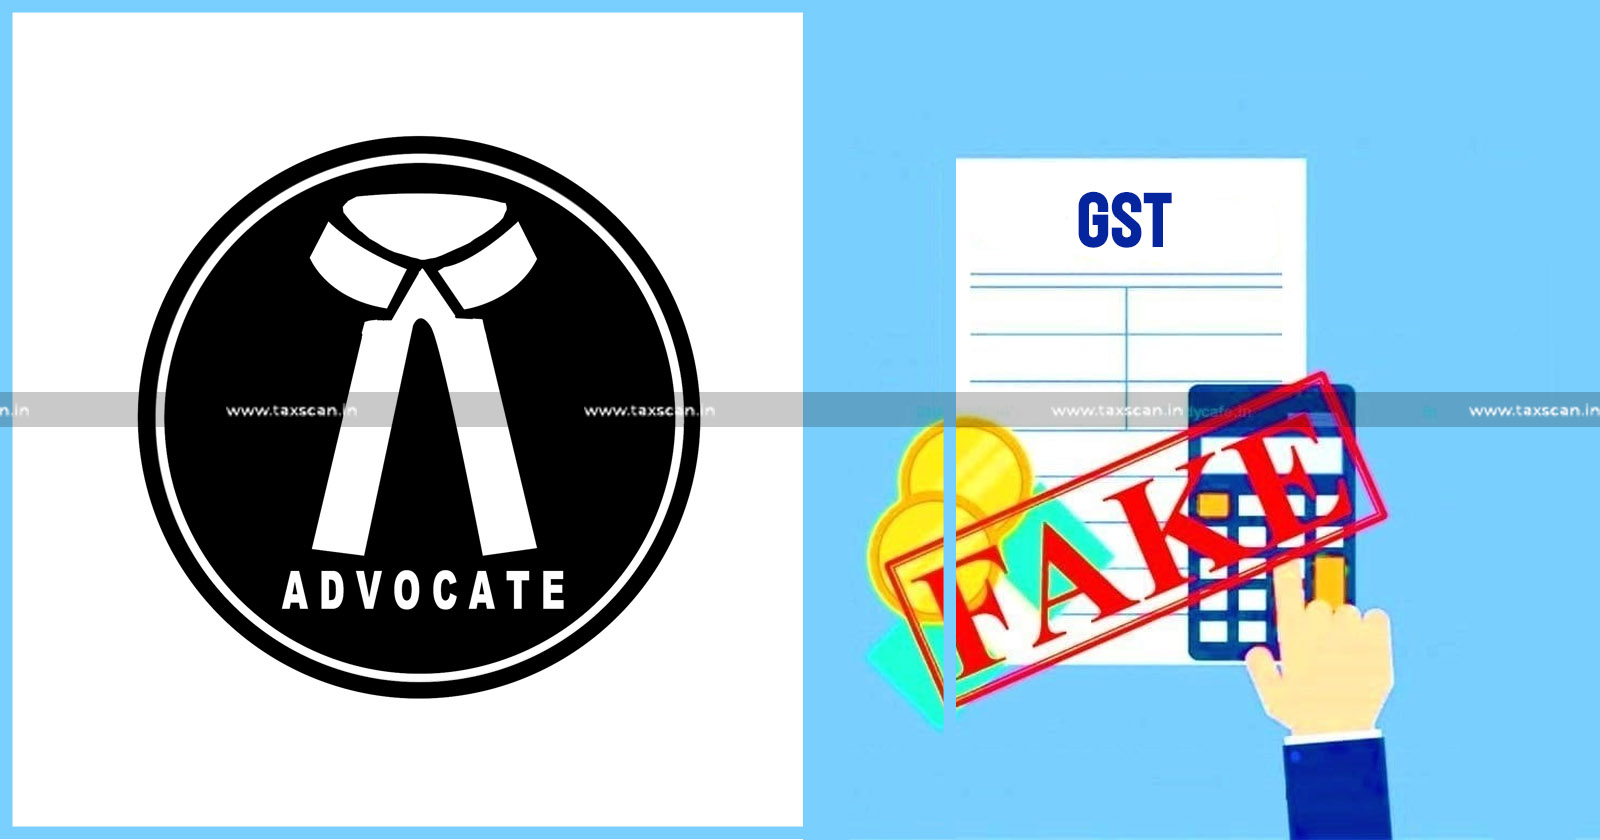 GST Department - Anti-Fraud - Anti-Fraud Dept of Police - Alleged Tax Evaders - Tax Evaders - Calcutta High Court - taxscan